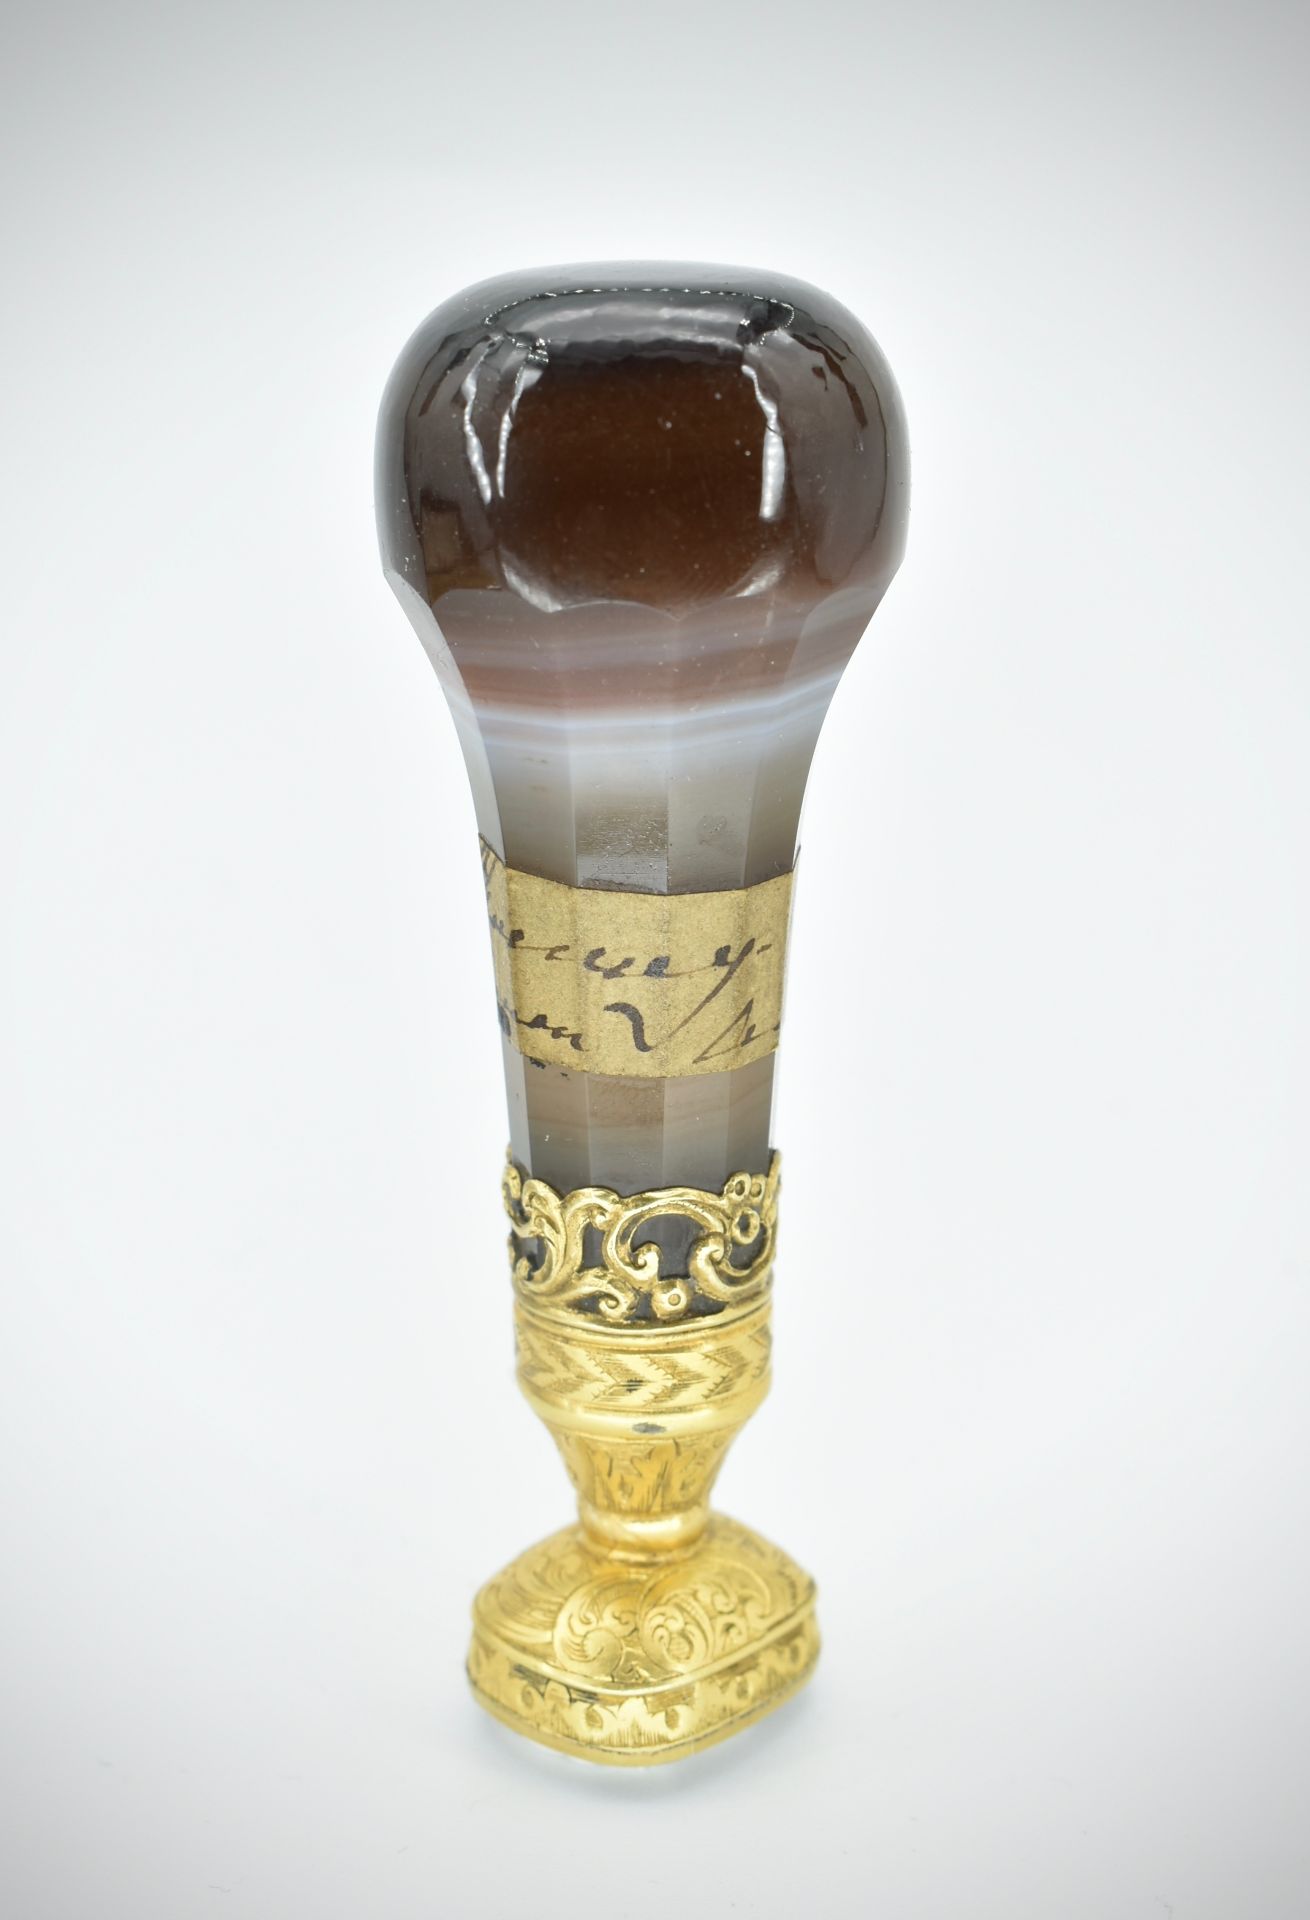 19th Century Banded Agate Desk Wax Seal - Image 5 of 7